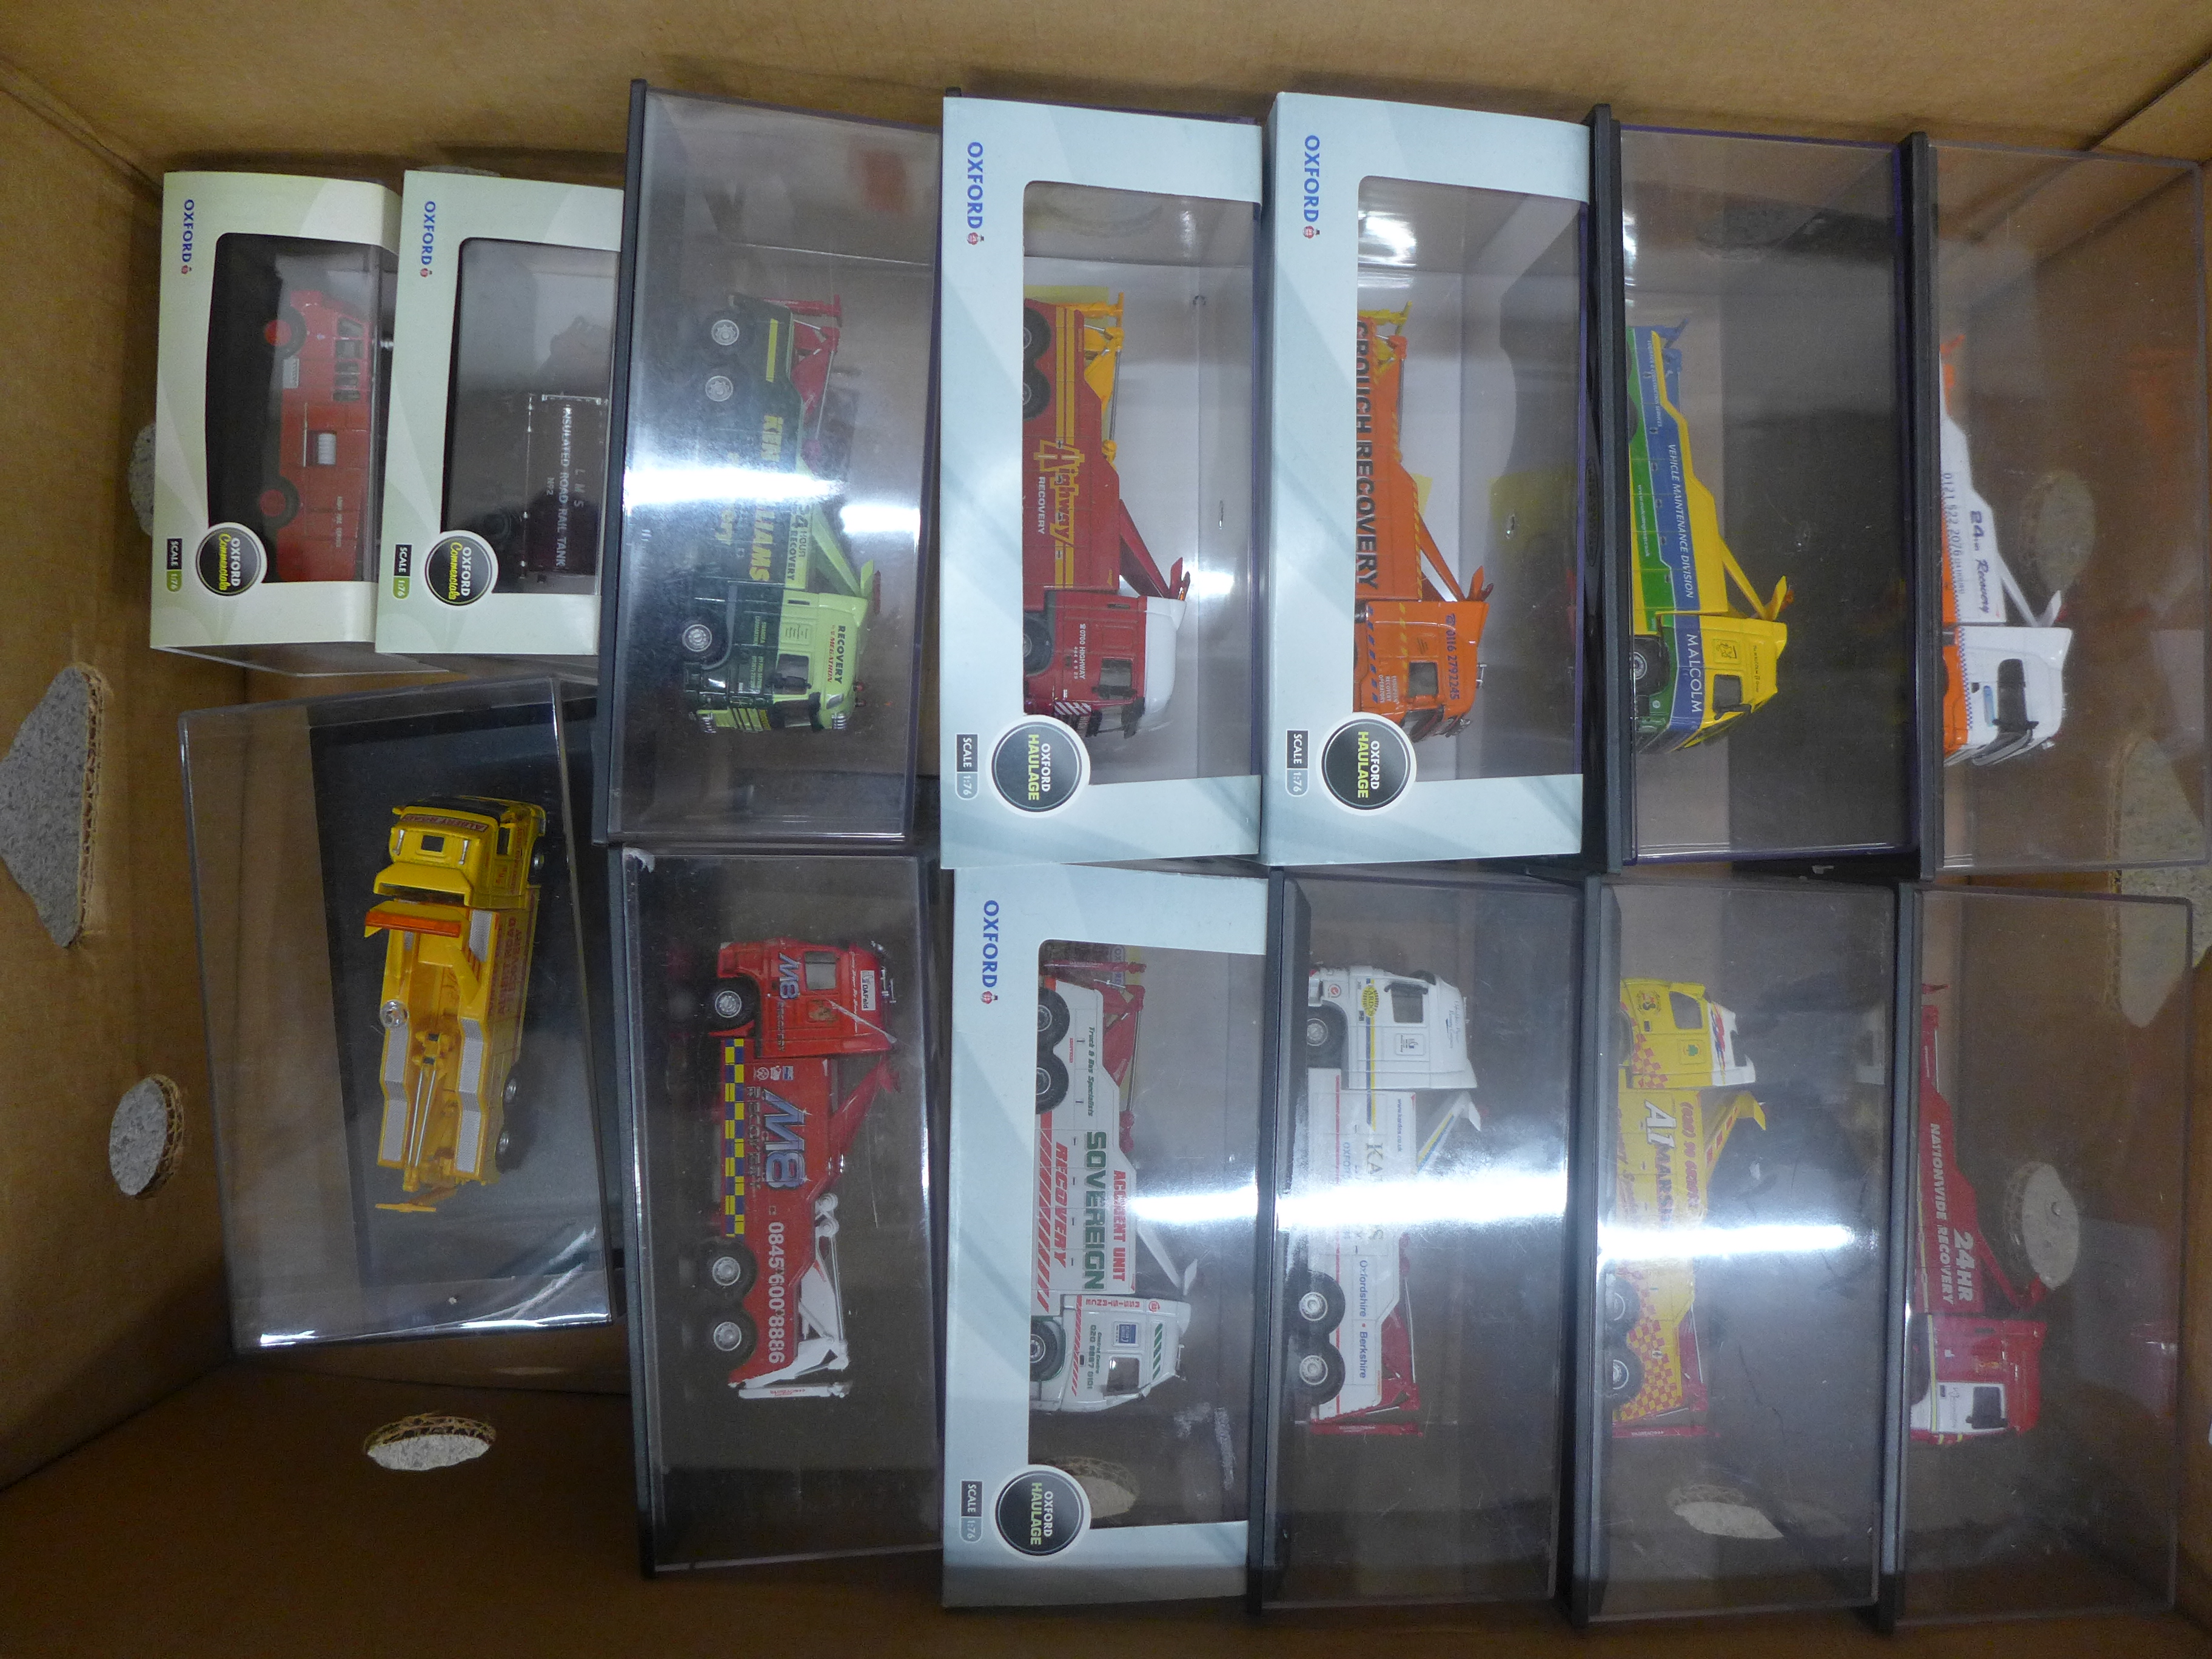 Oxford die-cast model vehicles, mainly vintage recovery trucks